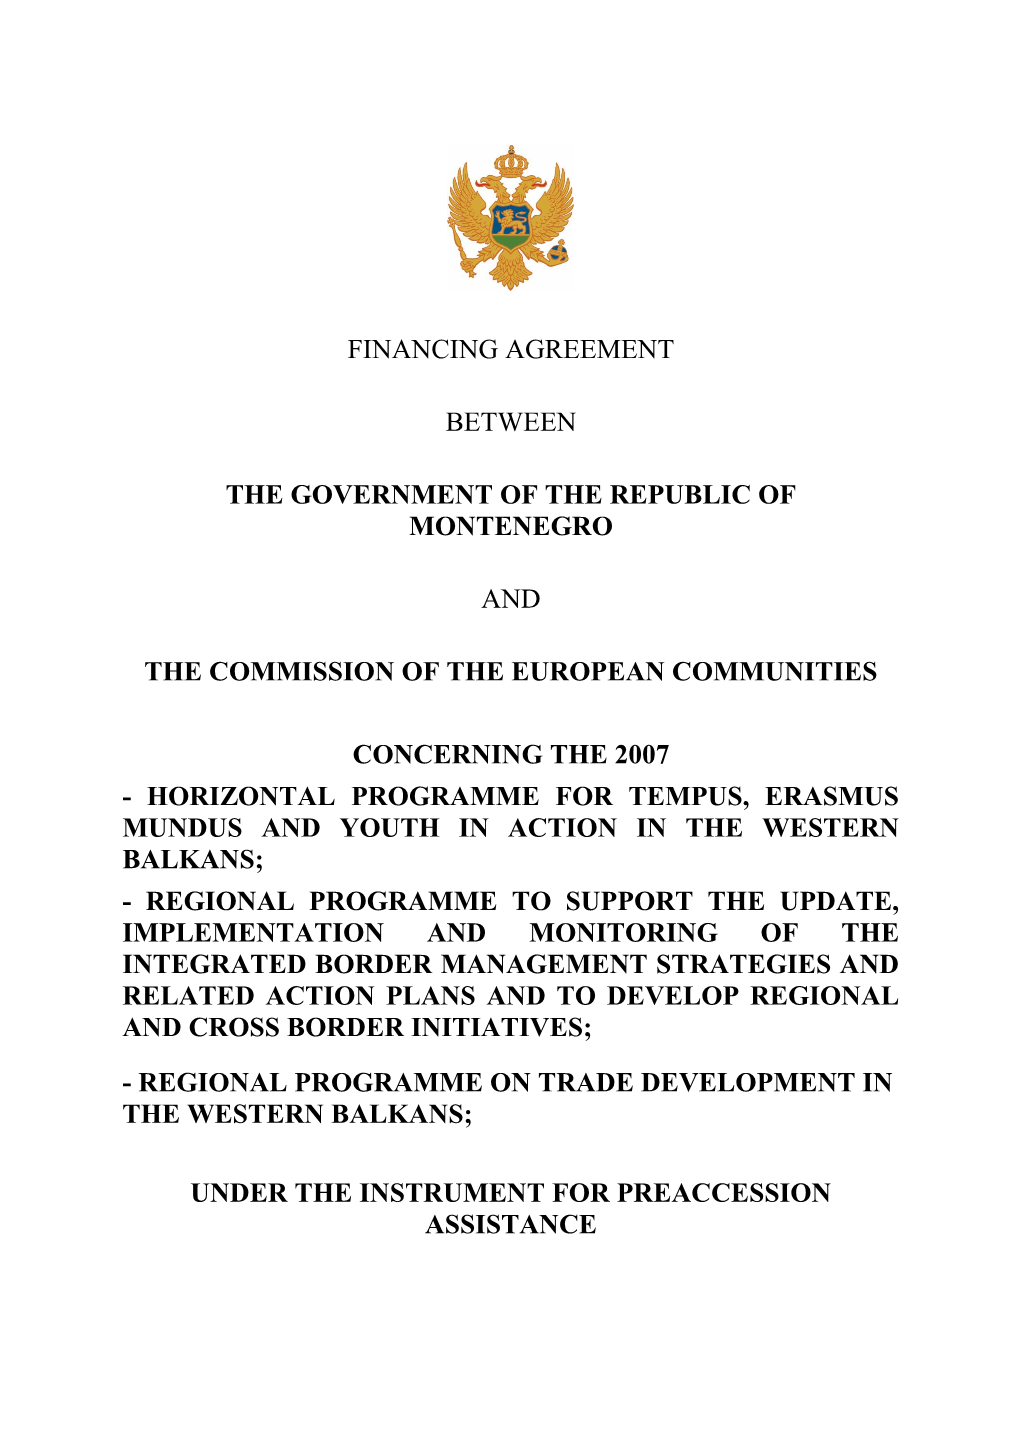 The Government of the Republic of Montenegro